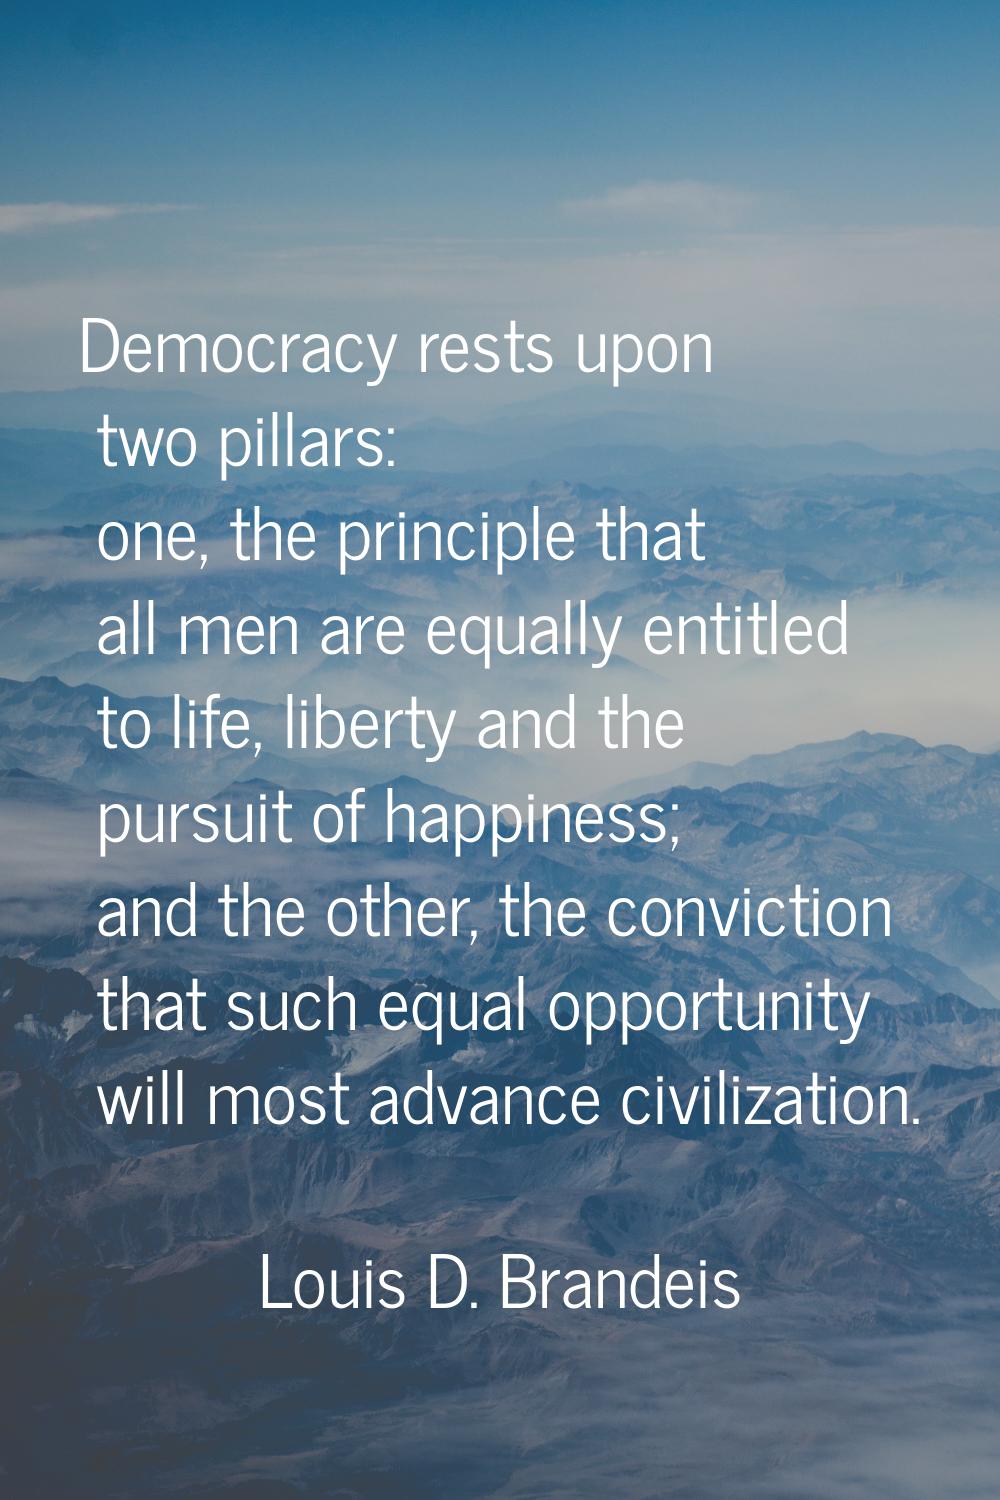 Democracy rests upon two pillars: one, the principle that all men are equally entitled to life, lib